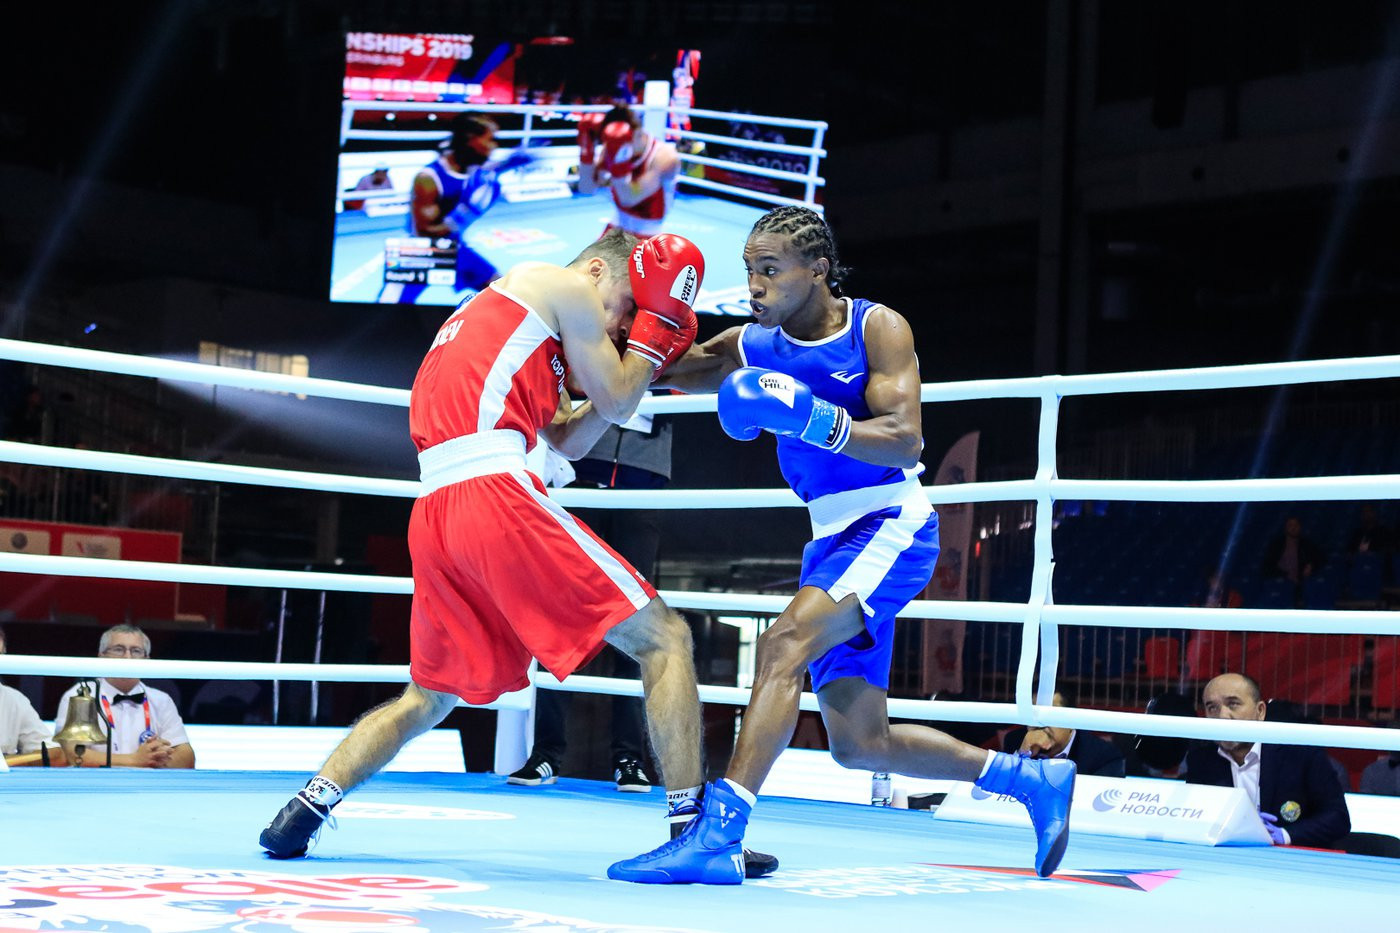 The Finnish boxer was the victor, narrowly triumphing 3-2 ©Yekaterinburg 2019